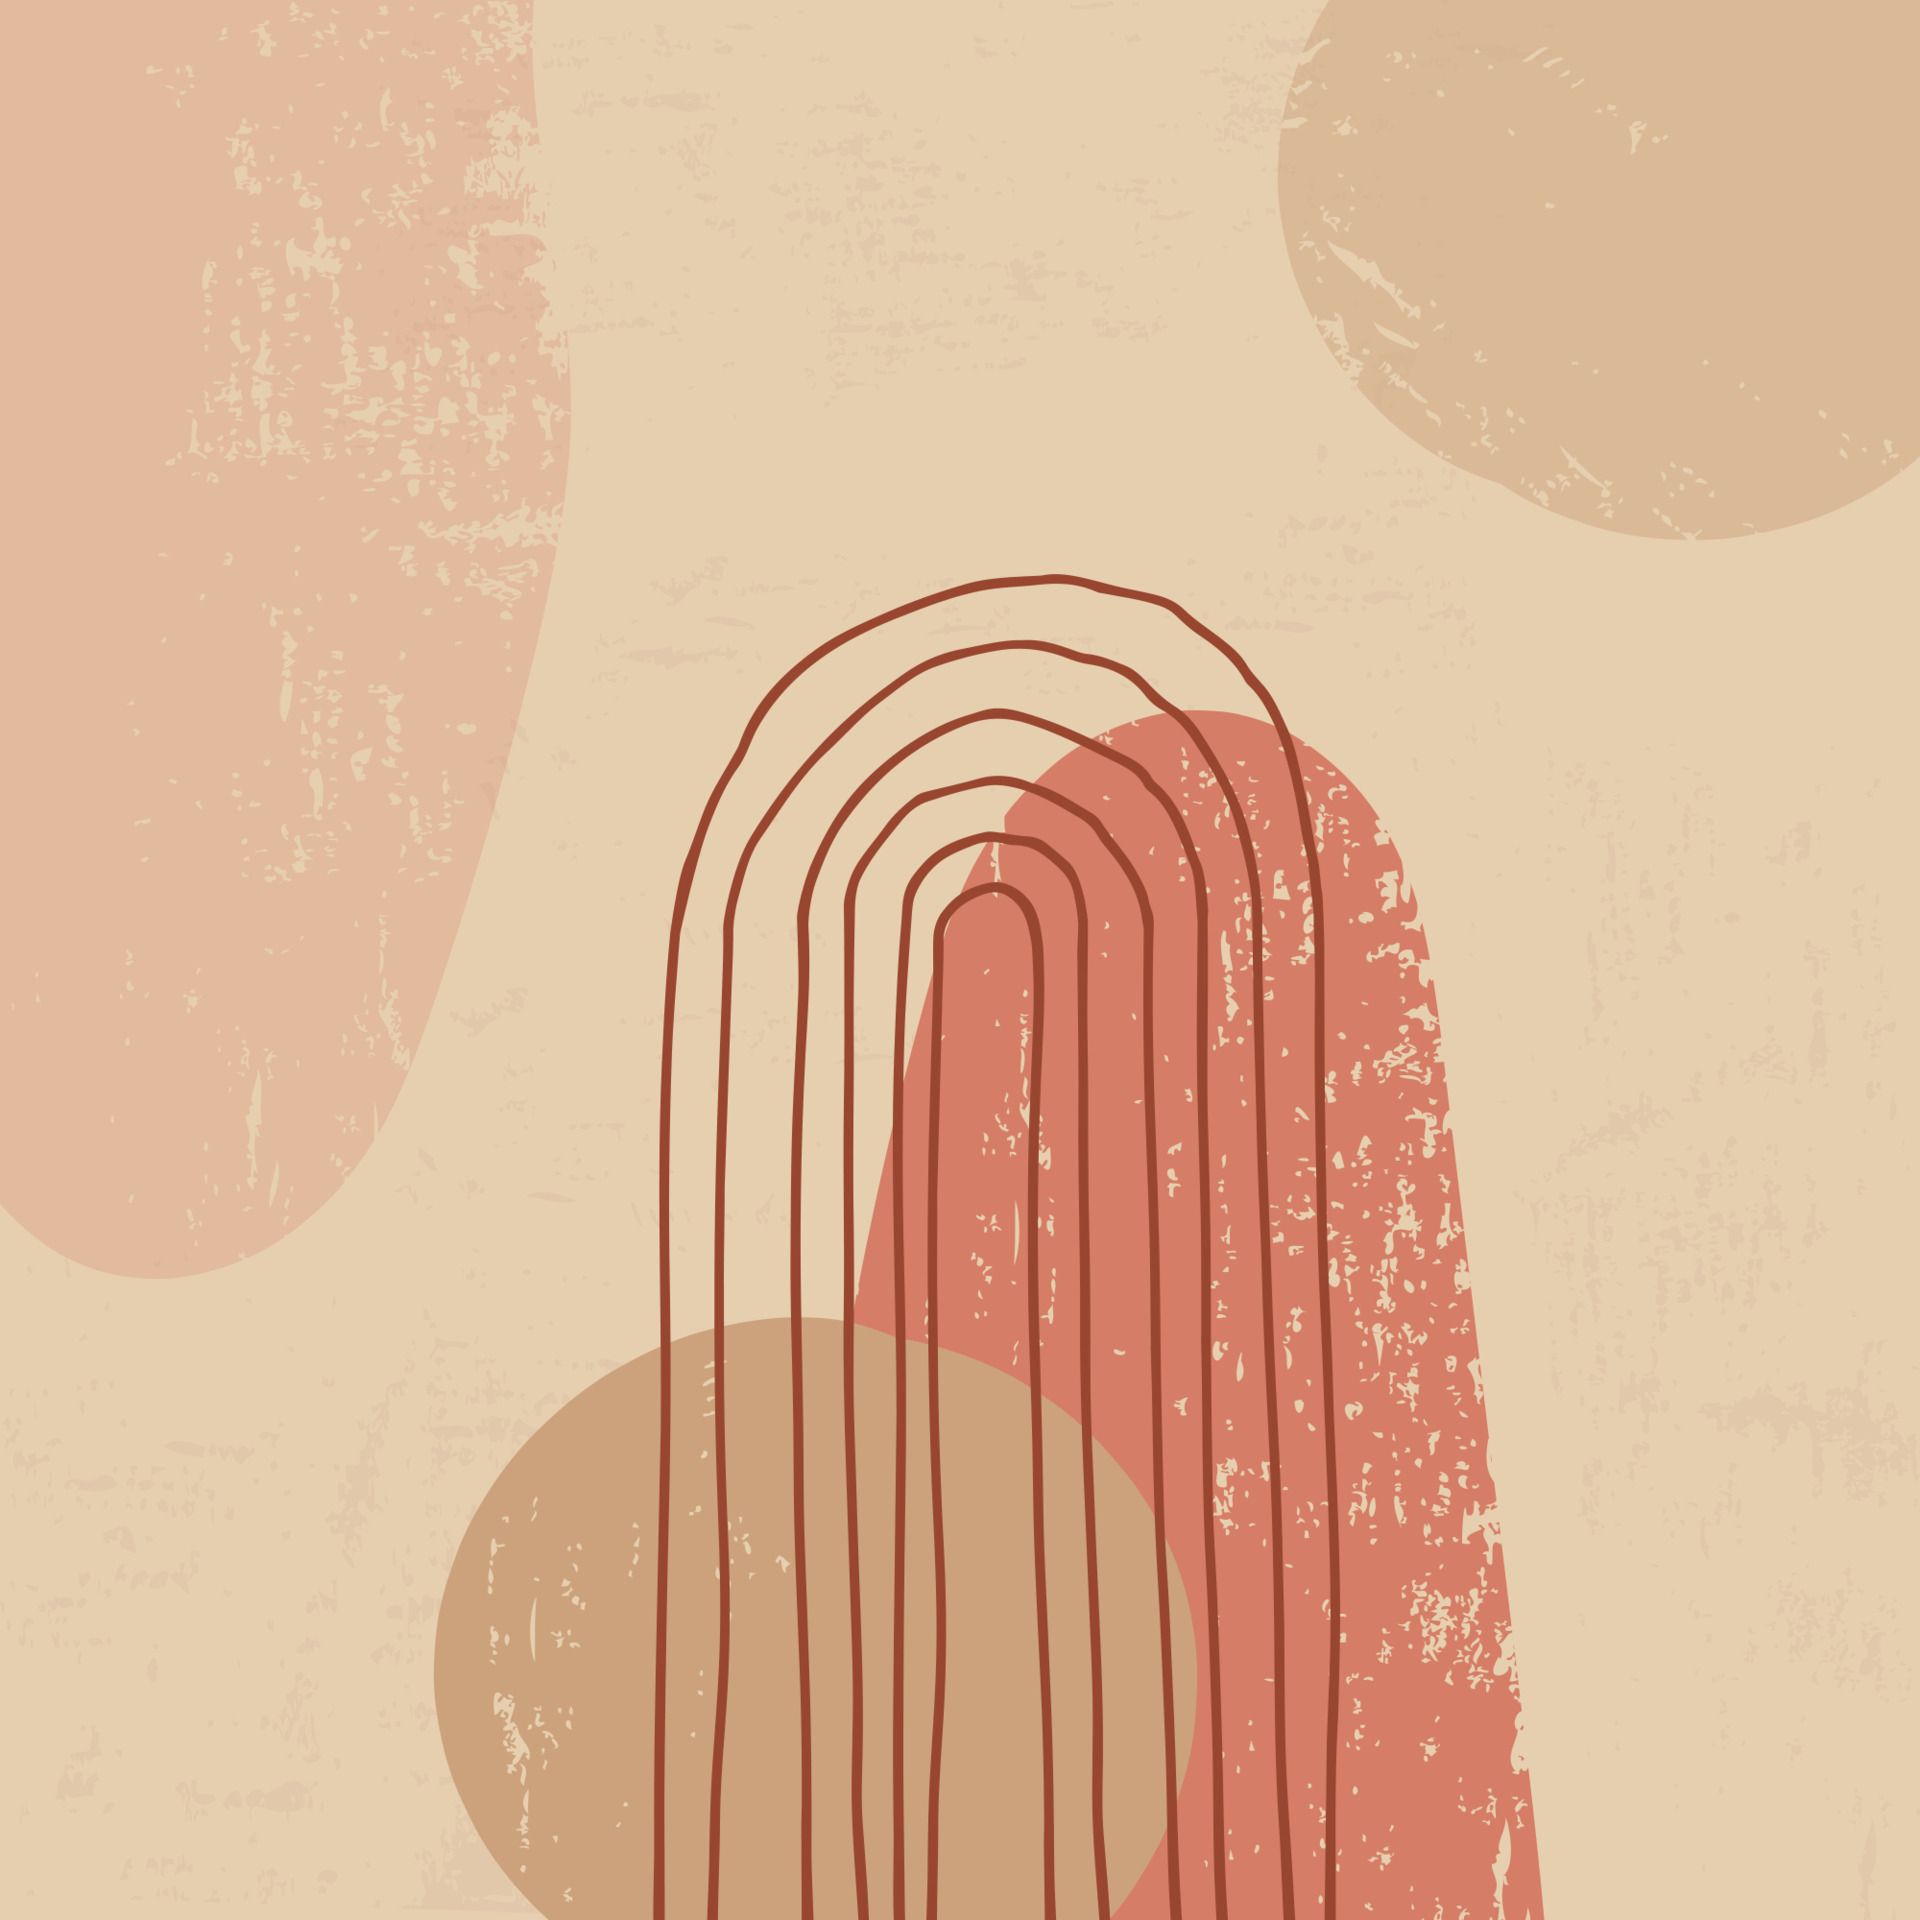 Fashion stylish with organic abstract shapes and line in nude pastel colors. Neutral beige, terracotta background in boho style. Vector Illustration